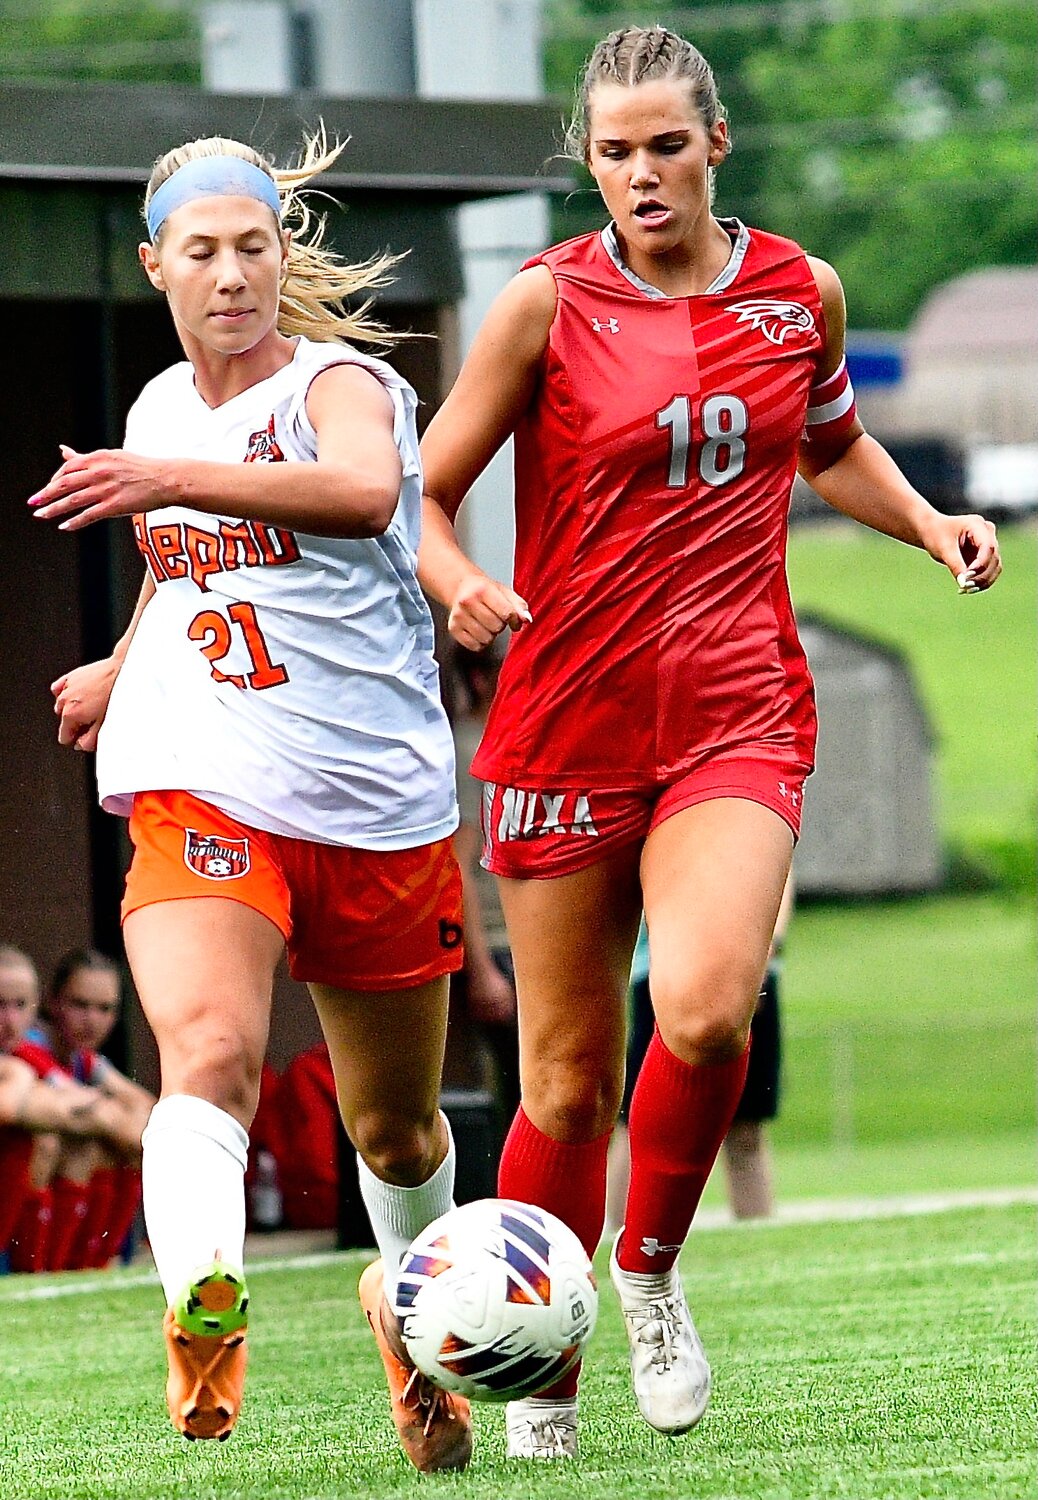 NIXA'S BROOKE TETER and a Republic player chase down the ball.